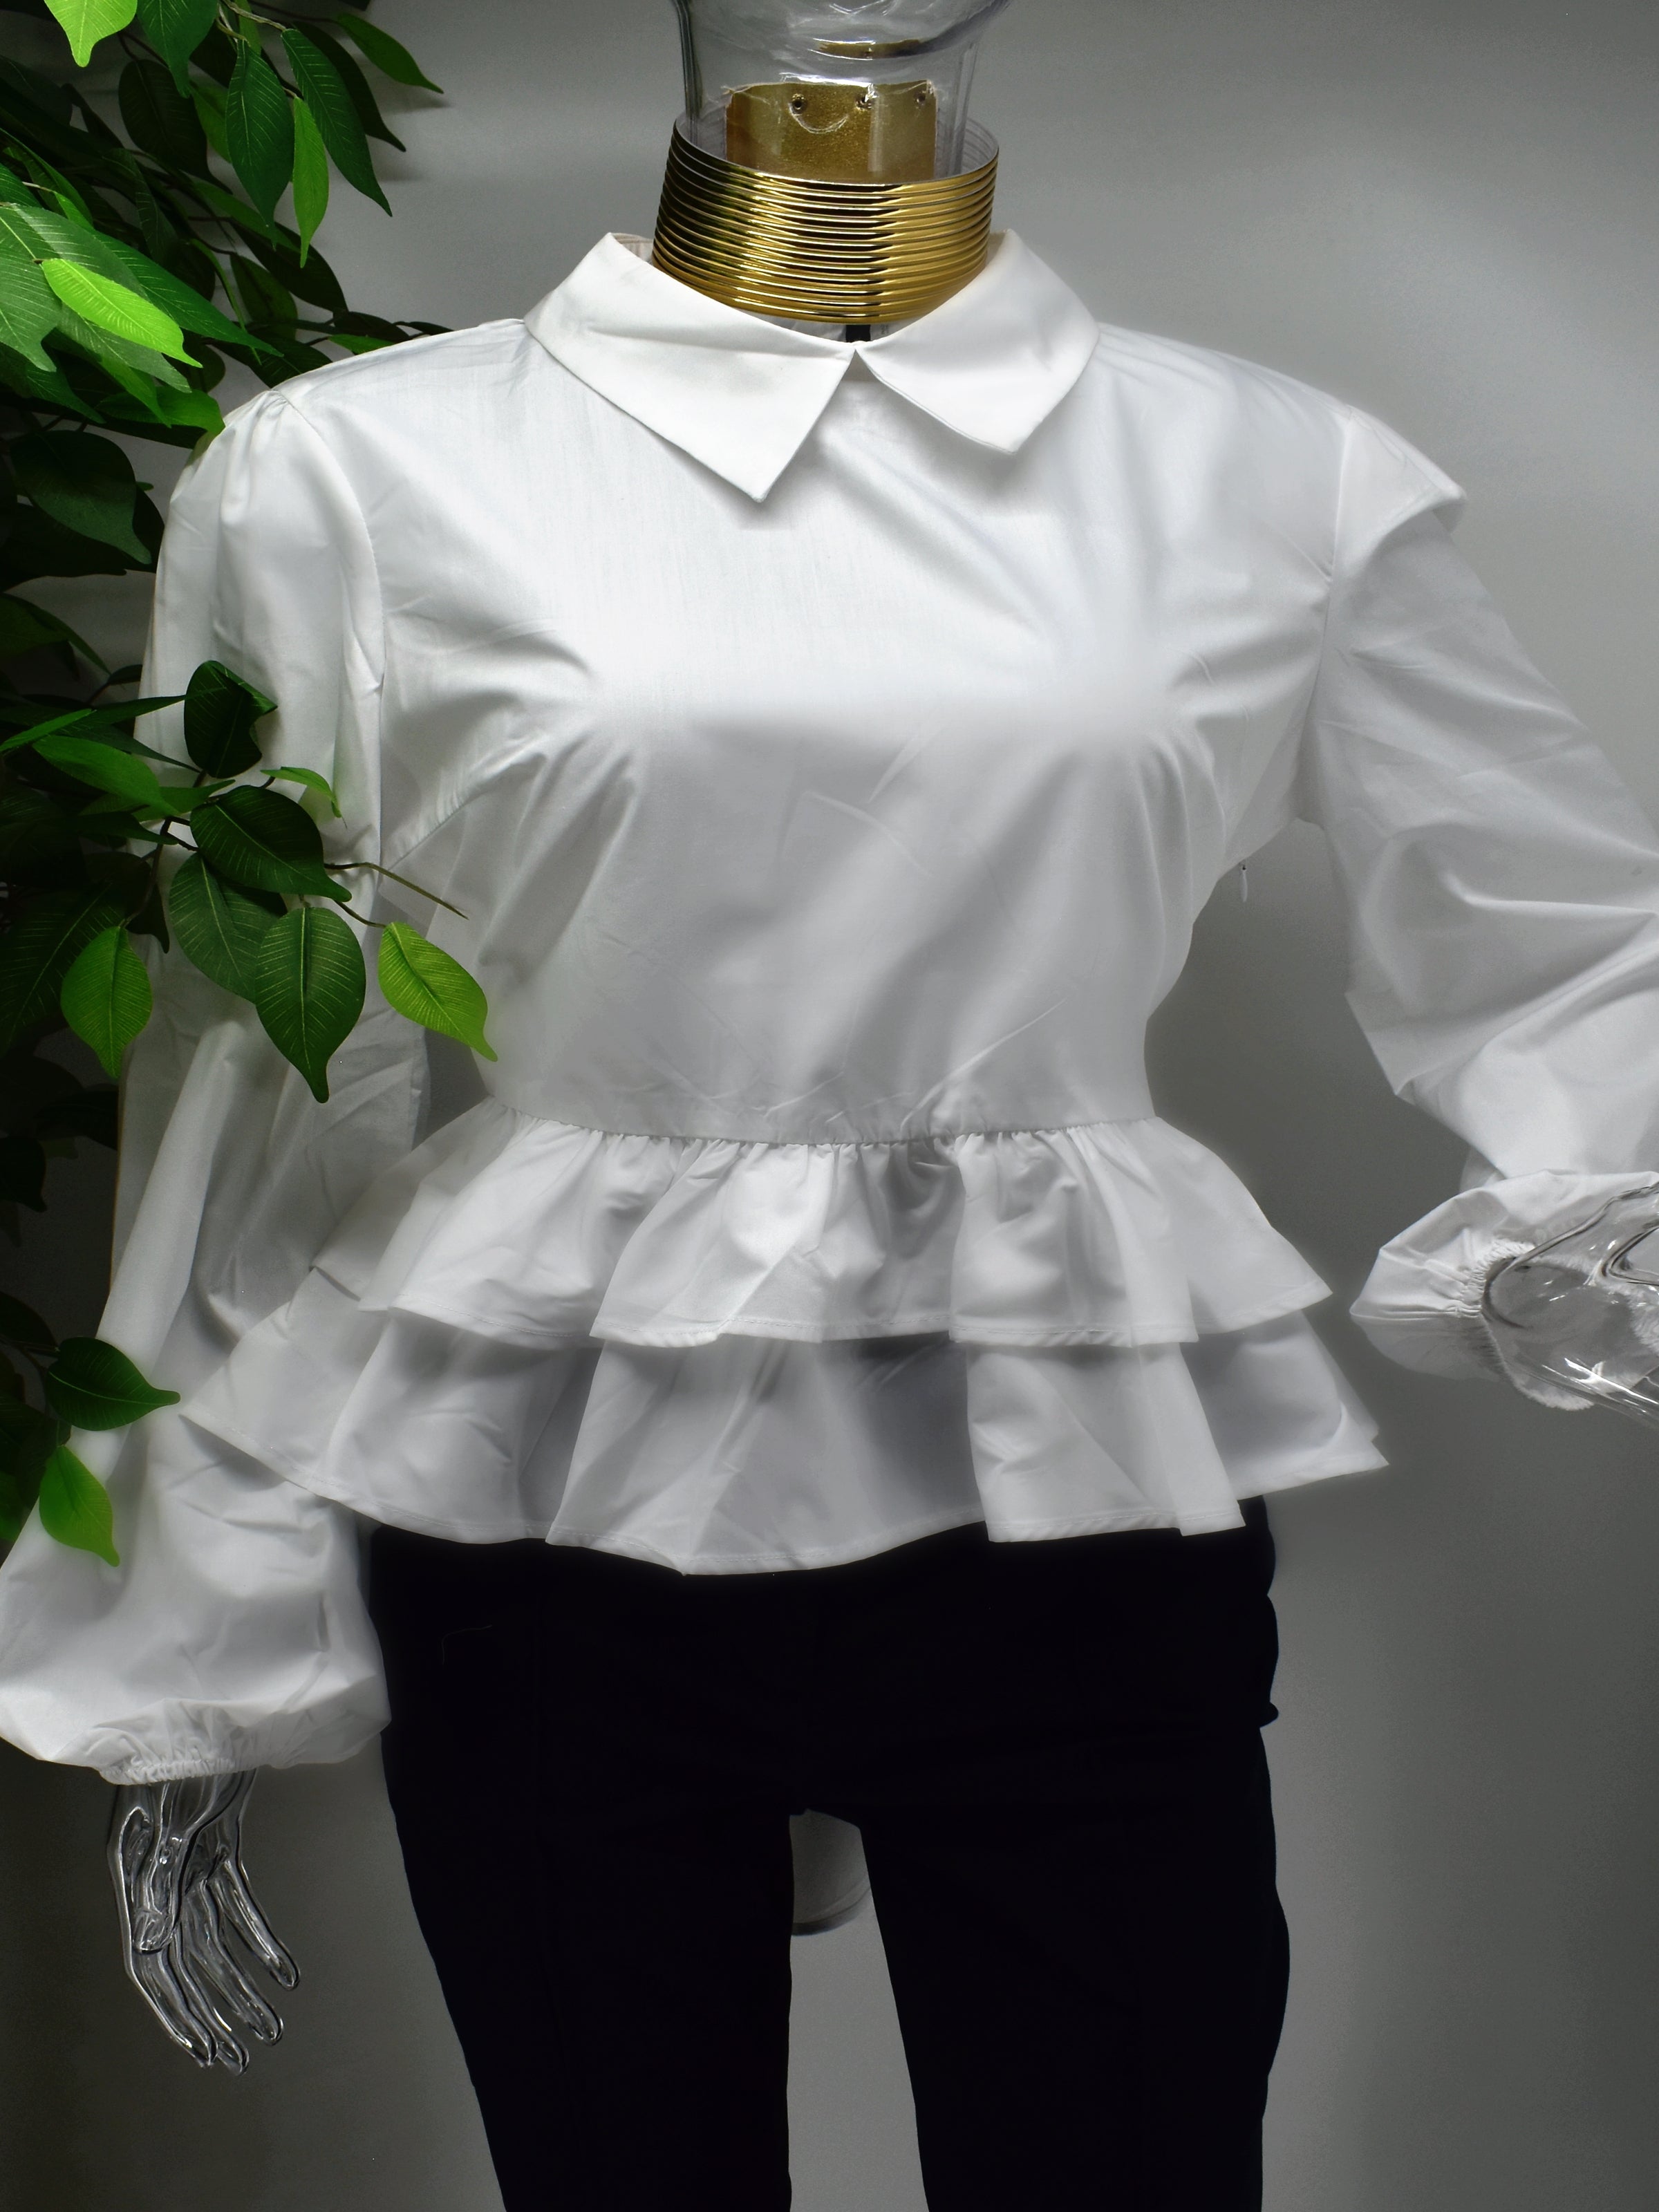 Fashion forward yet comfortably chic is what our Brier white shirt Blouse will deliver.  Brier is a white shirt blouse with a ruffled peplum waistline with the back hem longer than the front. 